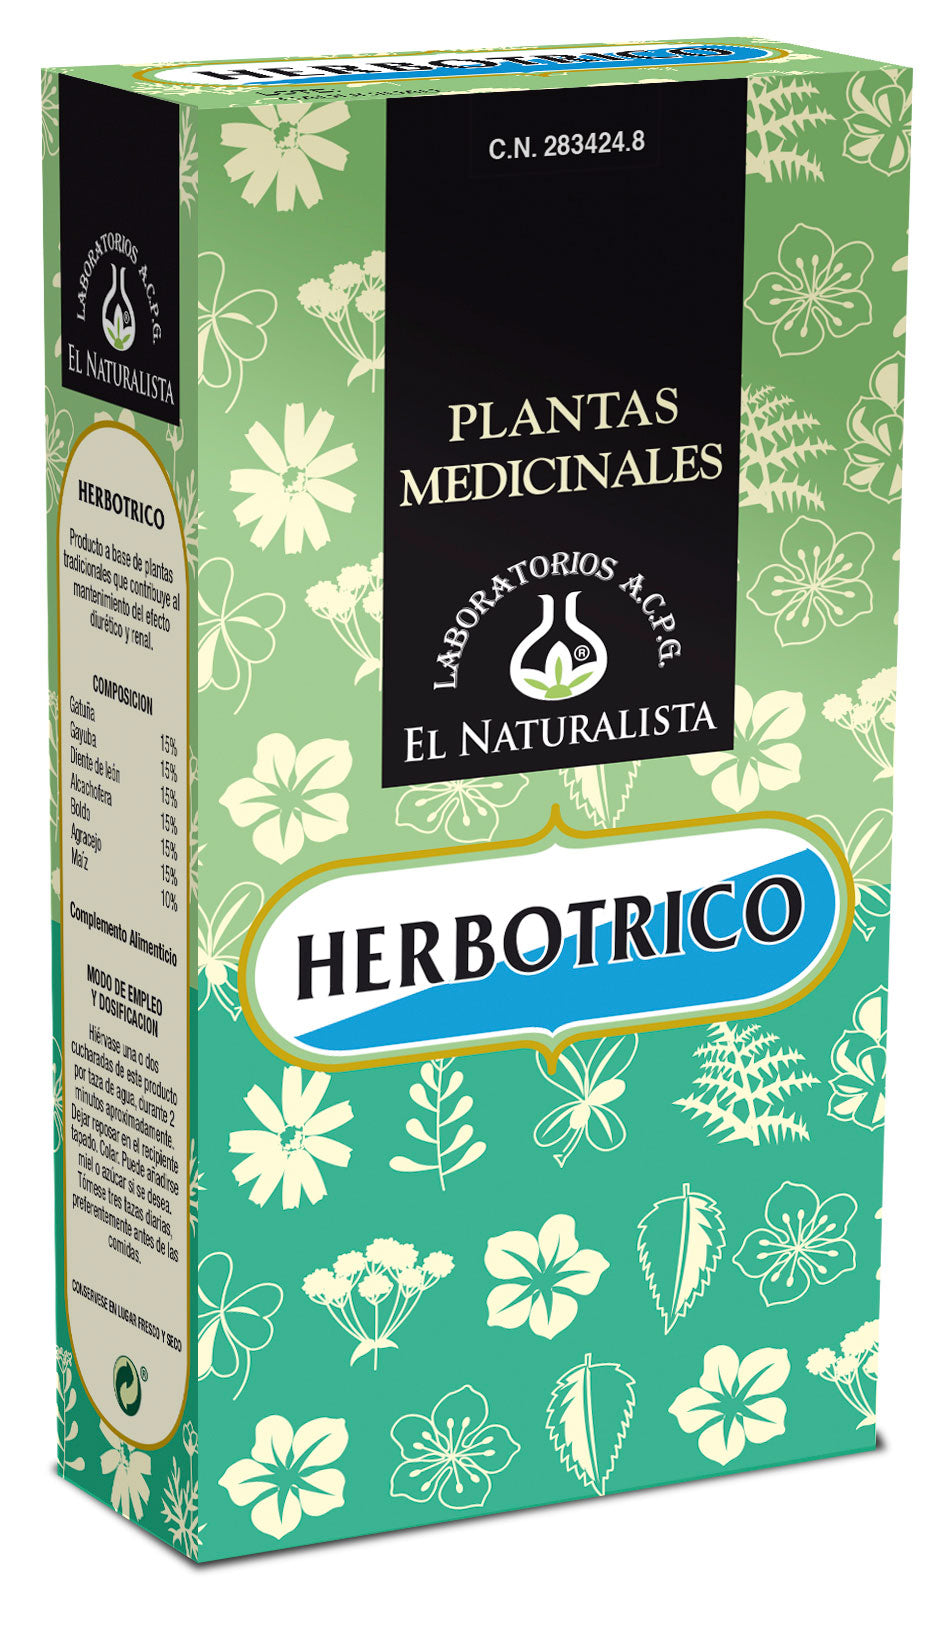 HERBOTRICO 100 G